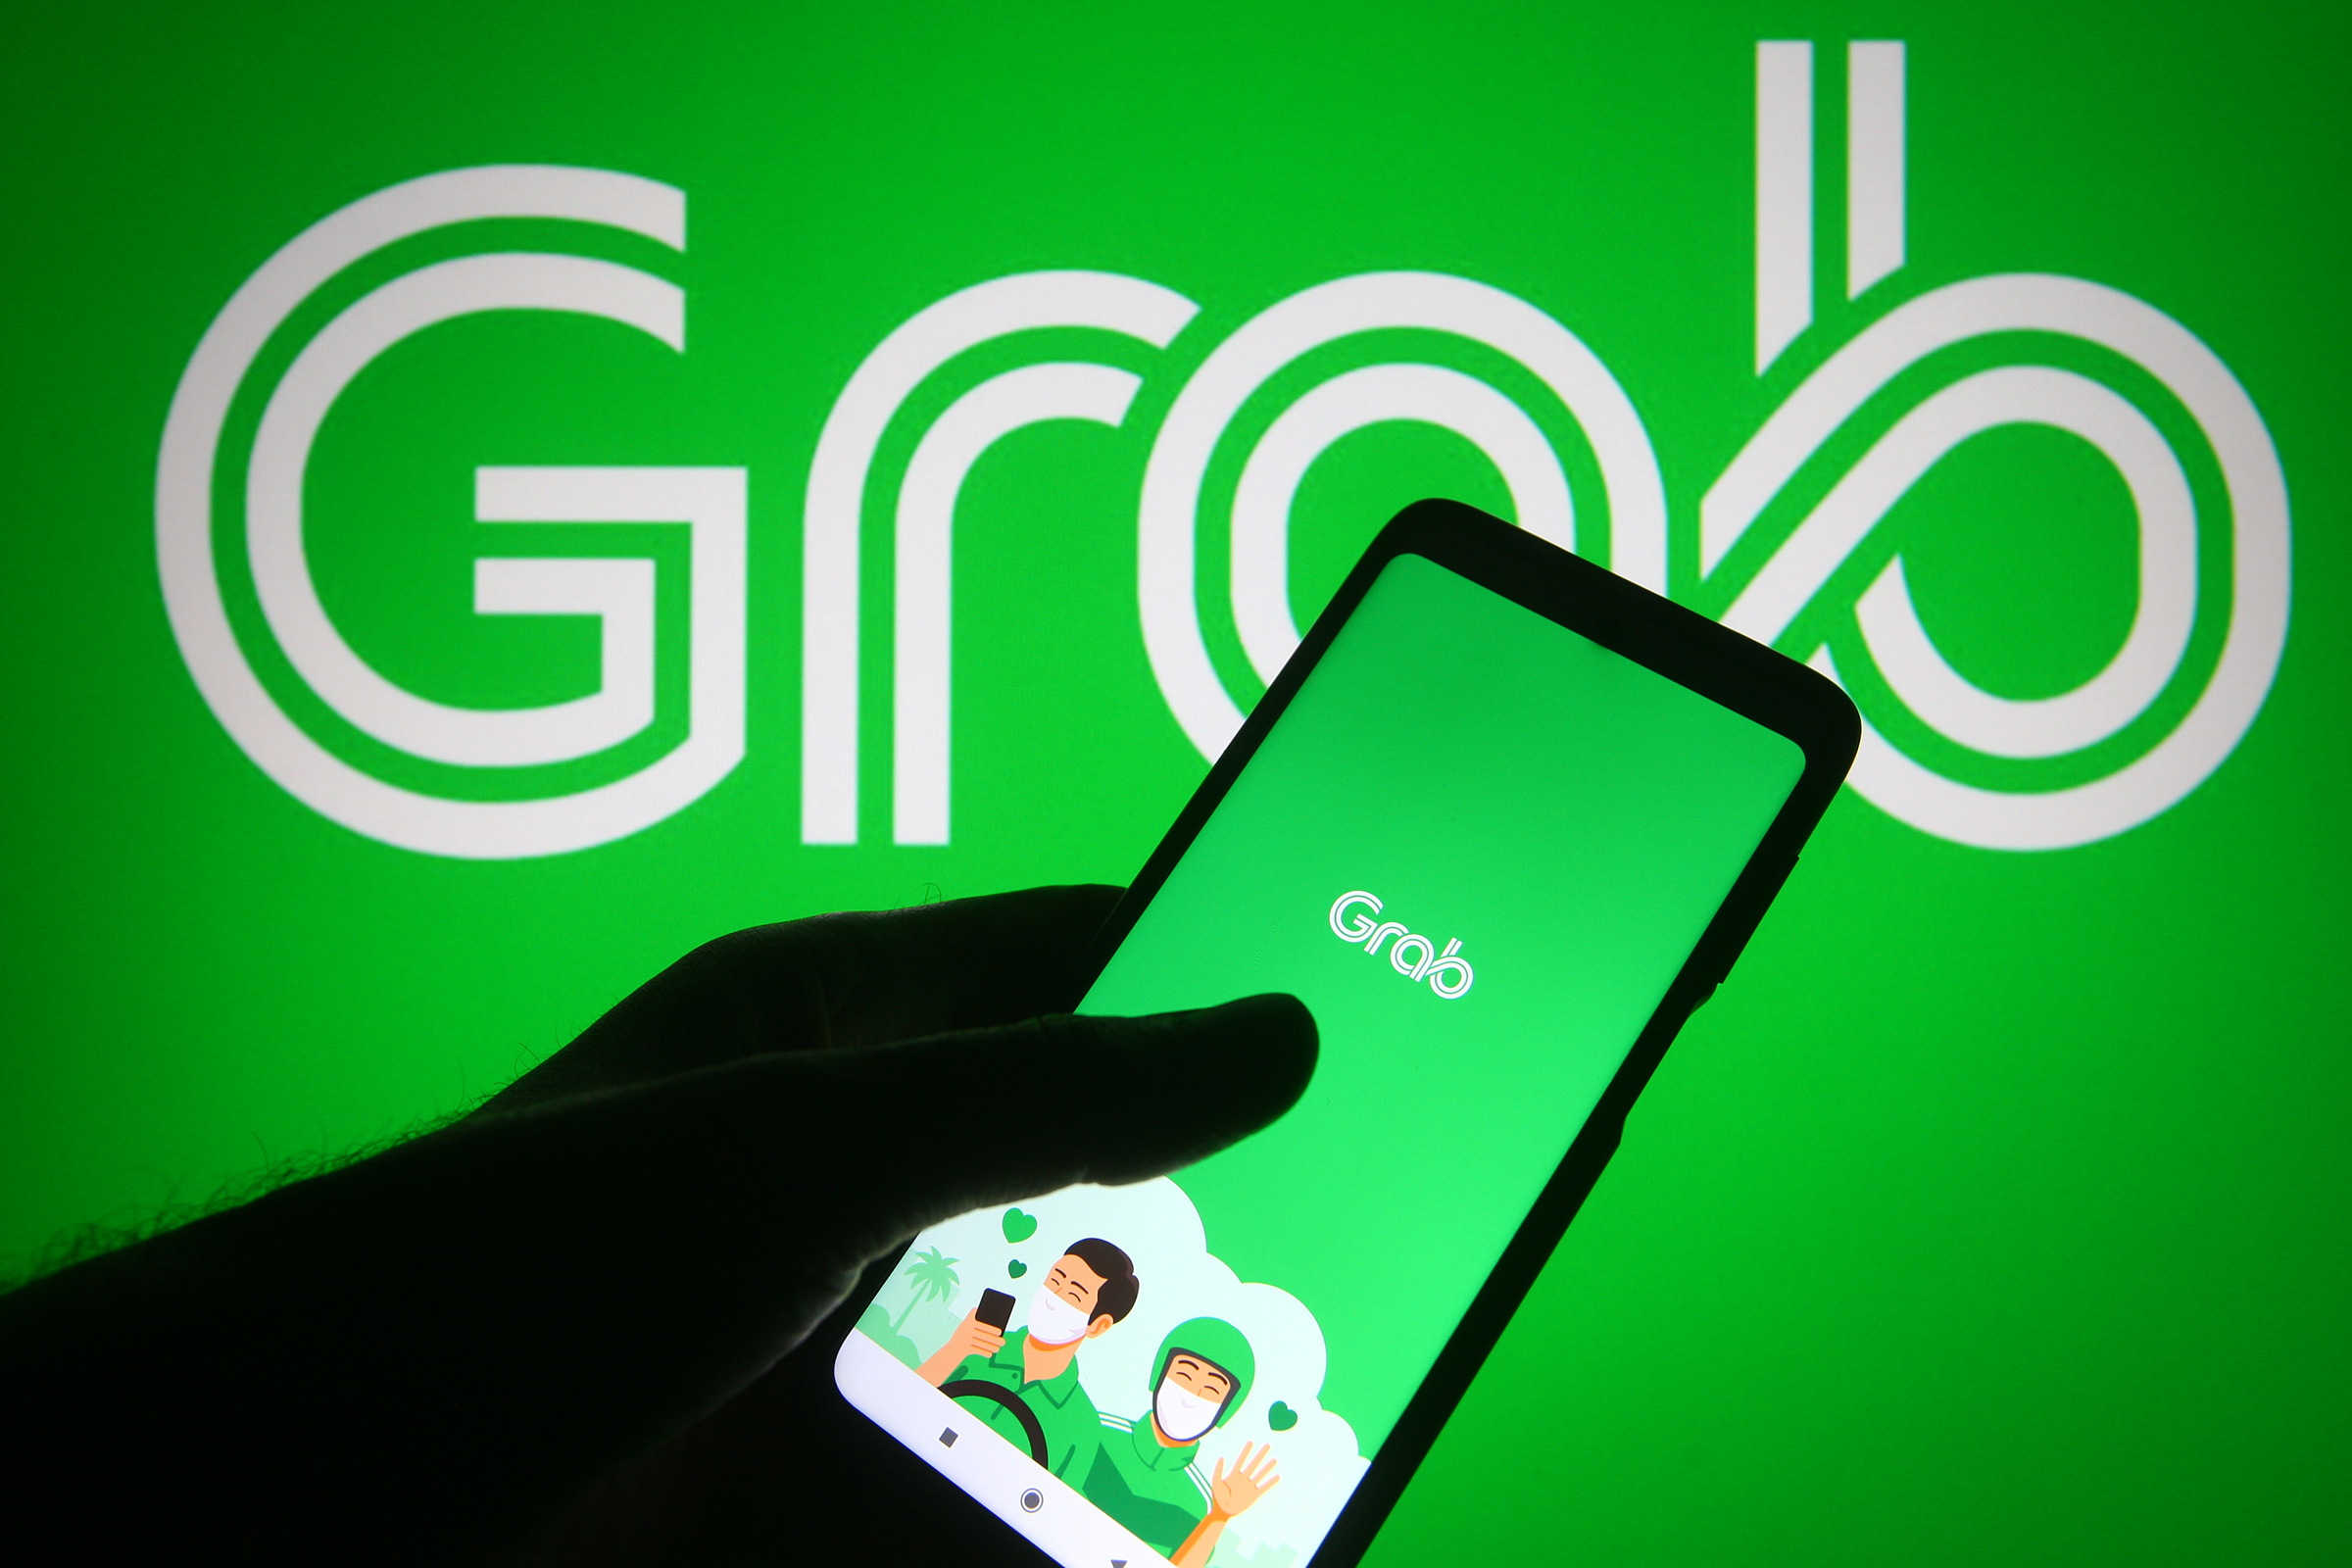 Grab's smartphone app. (Getty Images)